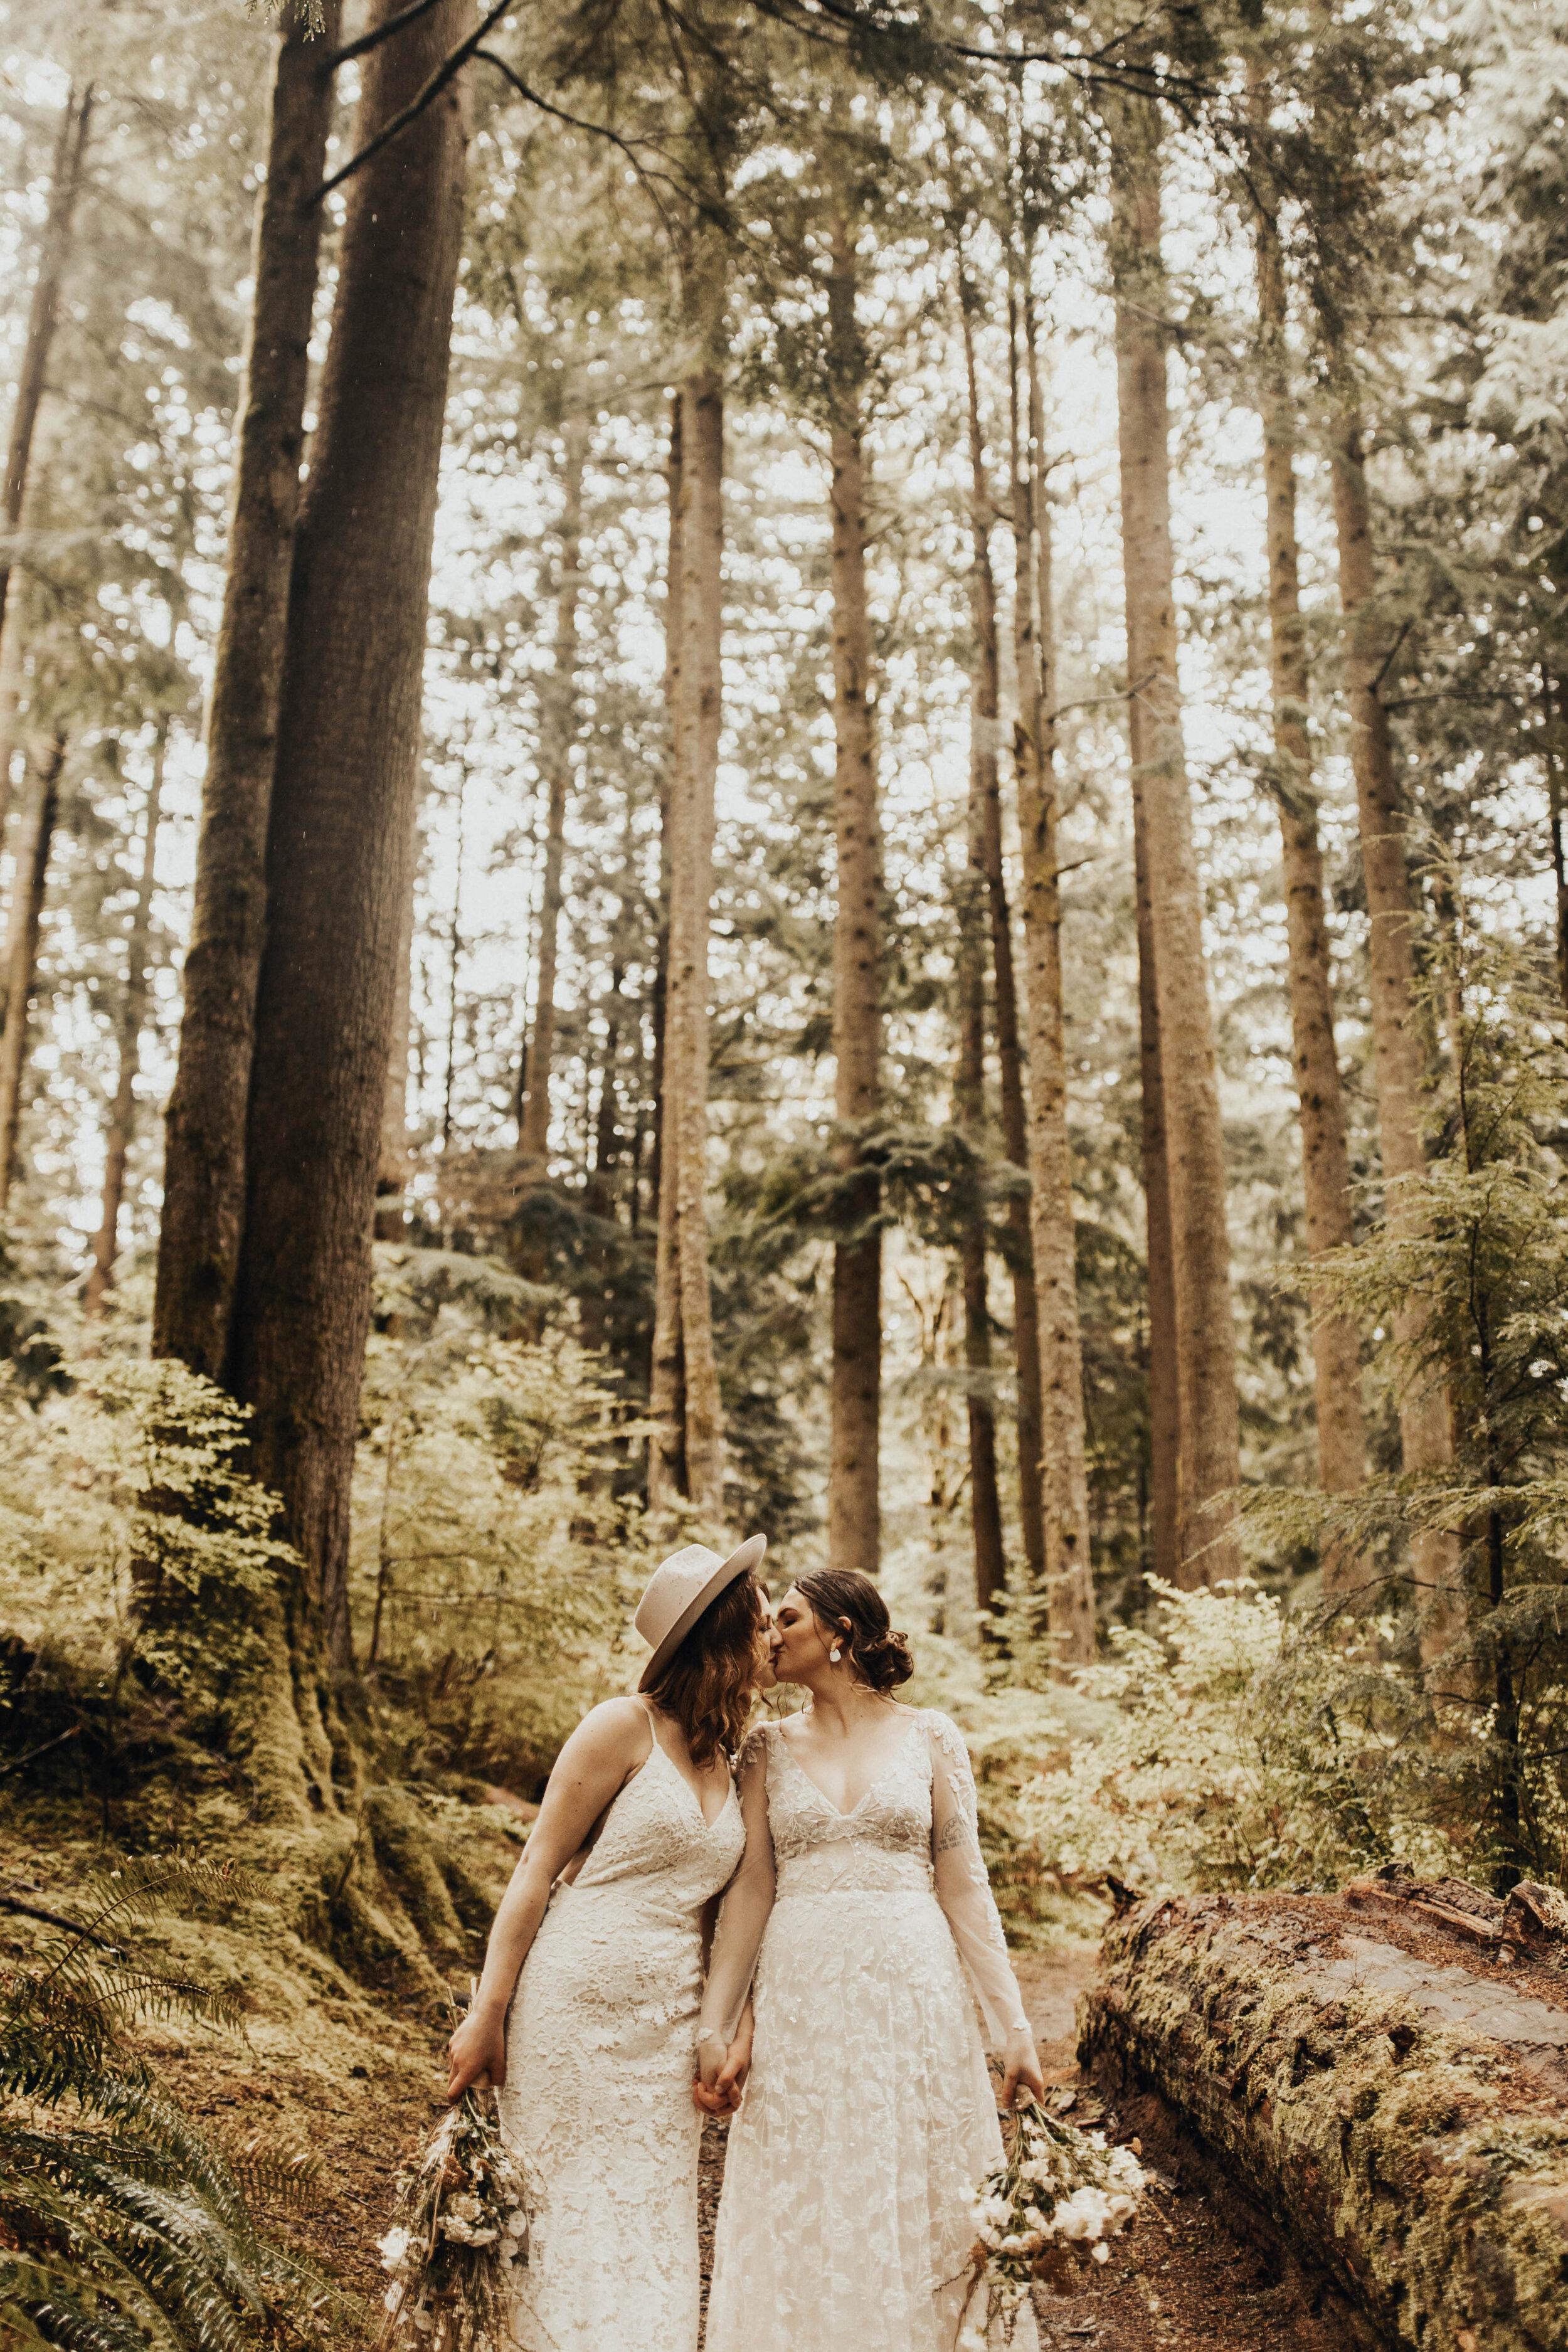  Styled LGBTQIA wedding elopement in Alena Leena Gingko wedding dress in North Bend Oregon photographed by Devoted and Wild 